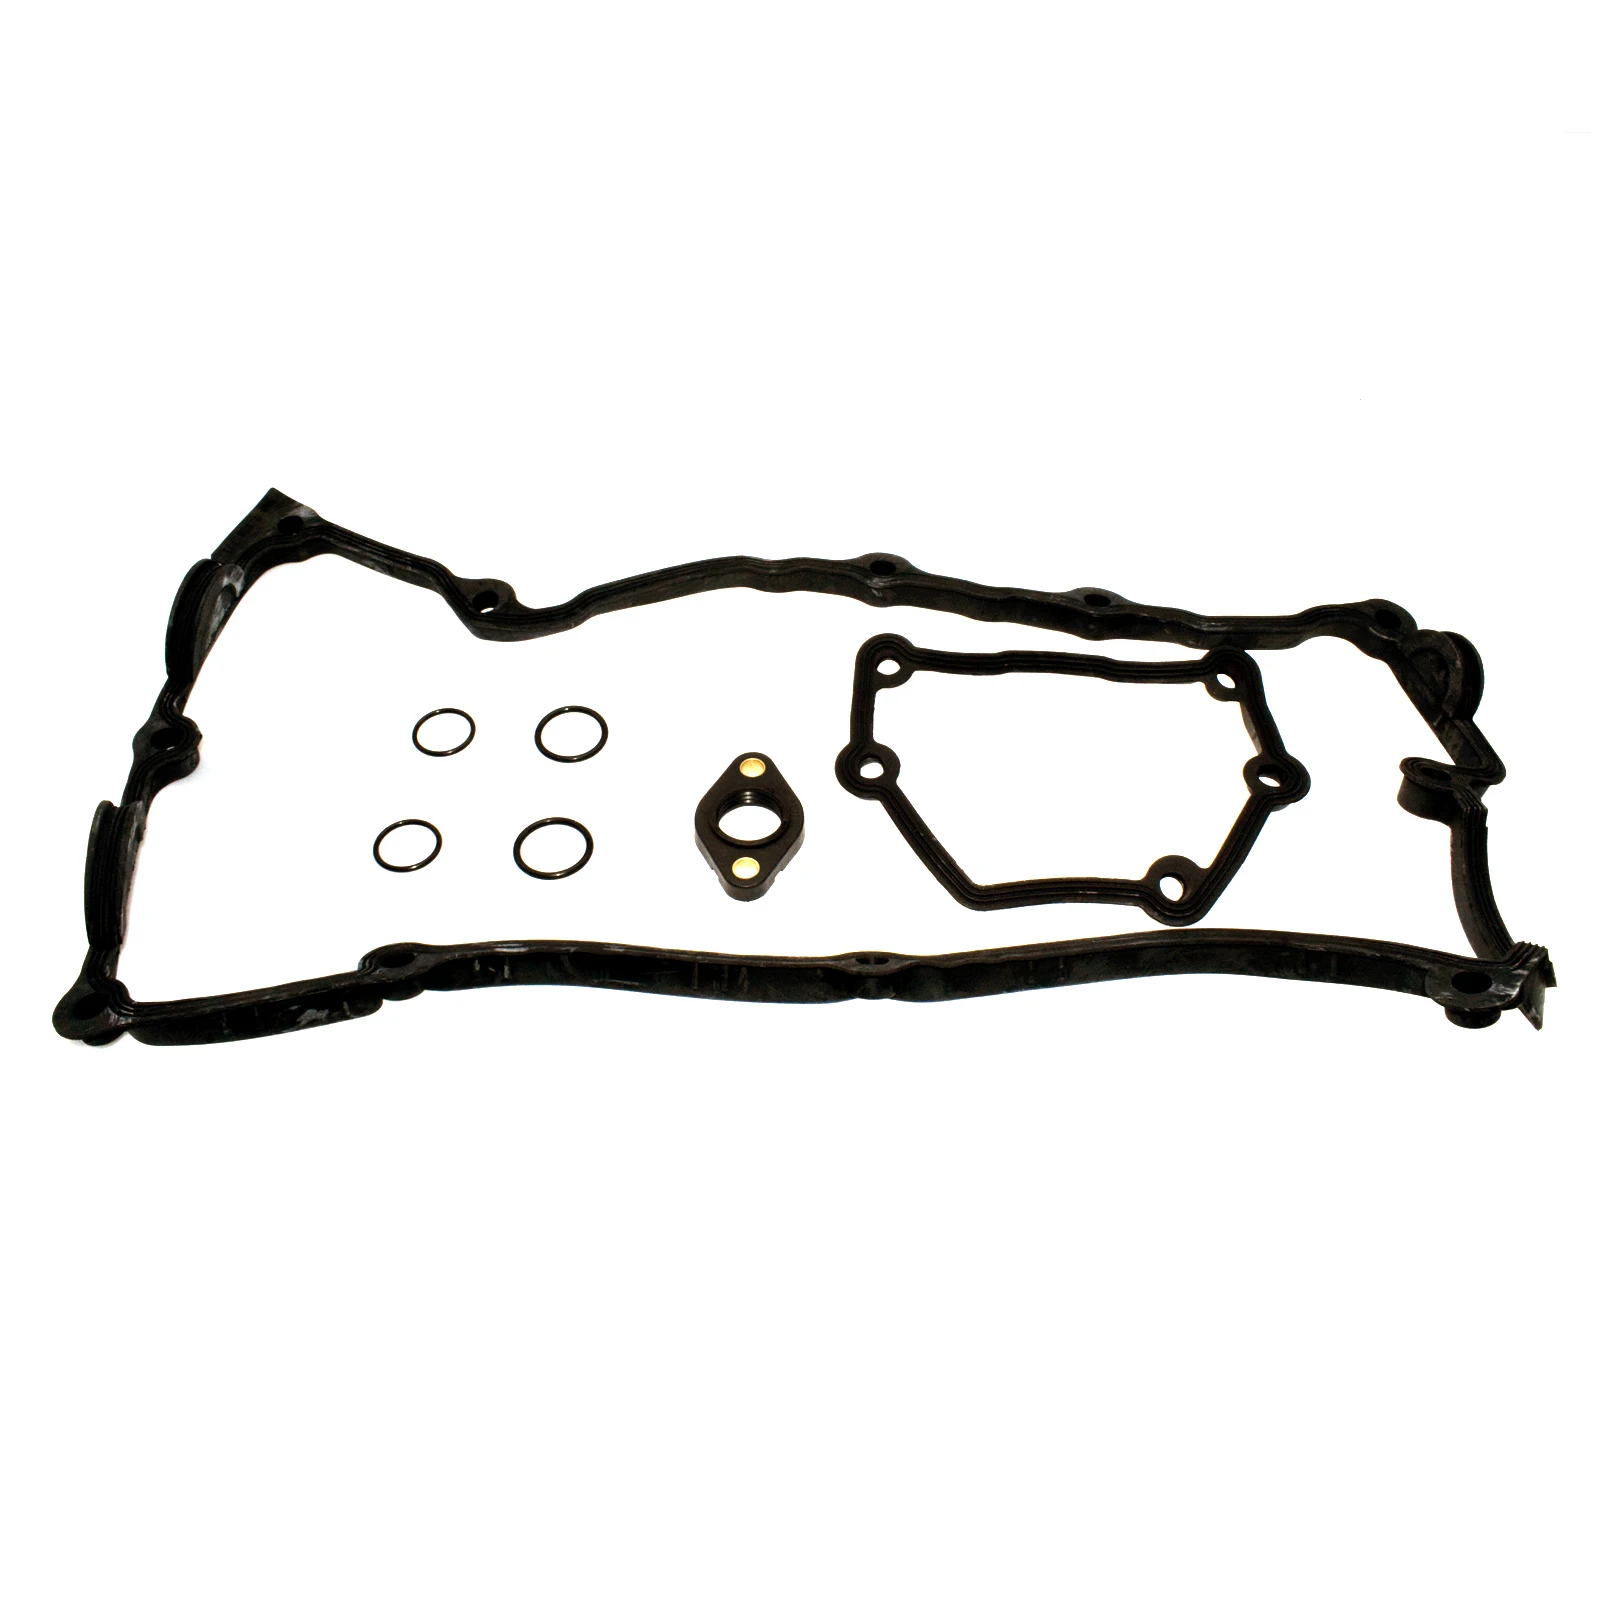 

OE: 11377514008, 11377514007, 11377502022, 11120032224 for BMW E46 Cylinder Gasket Seal Kit